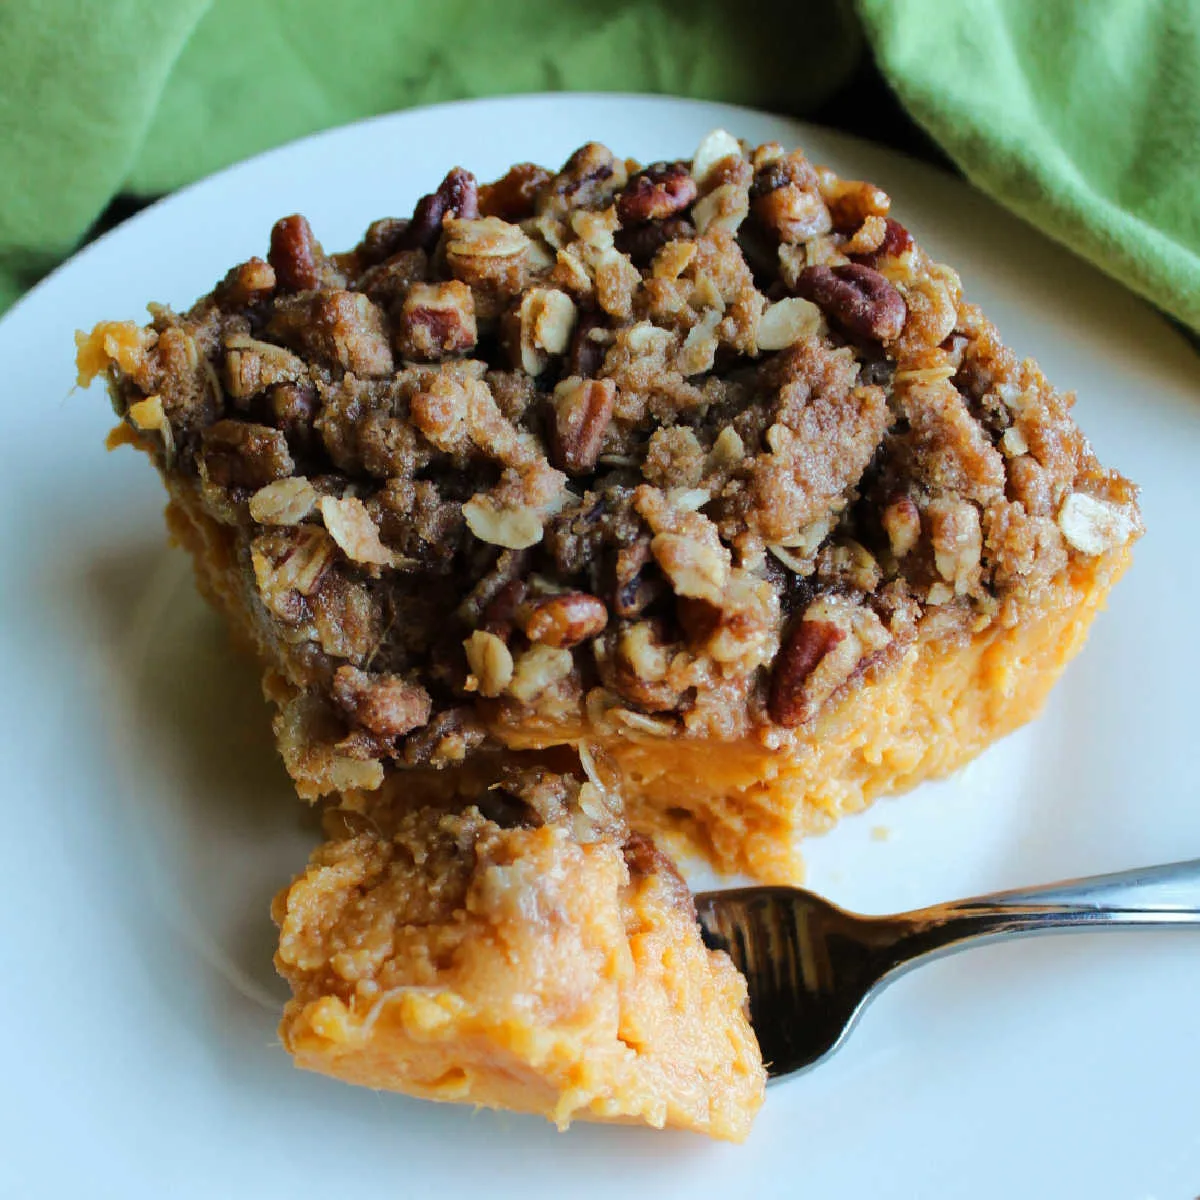 Forkful of maple sweet potato casserole topped with oats, pecans and brown sugar ready to eat.